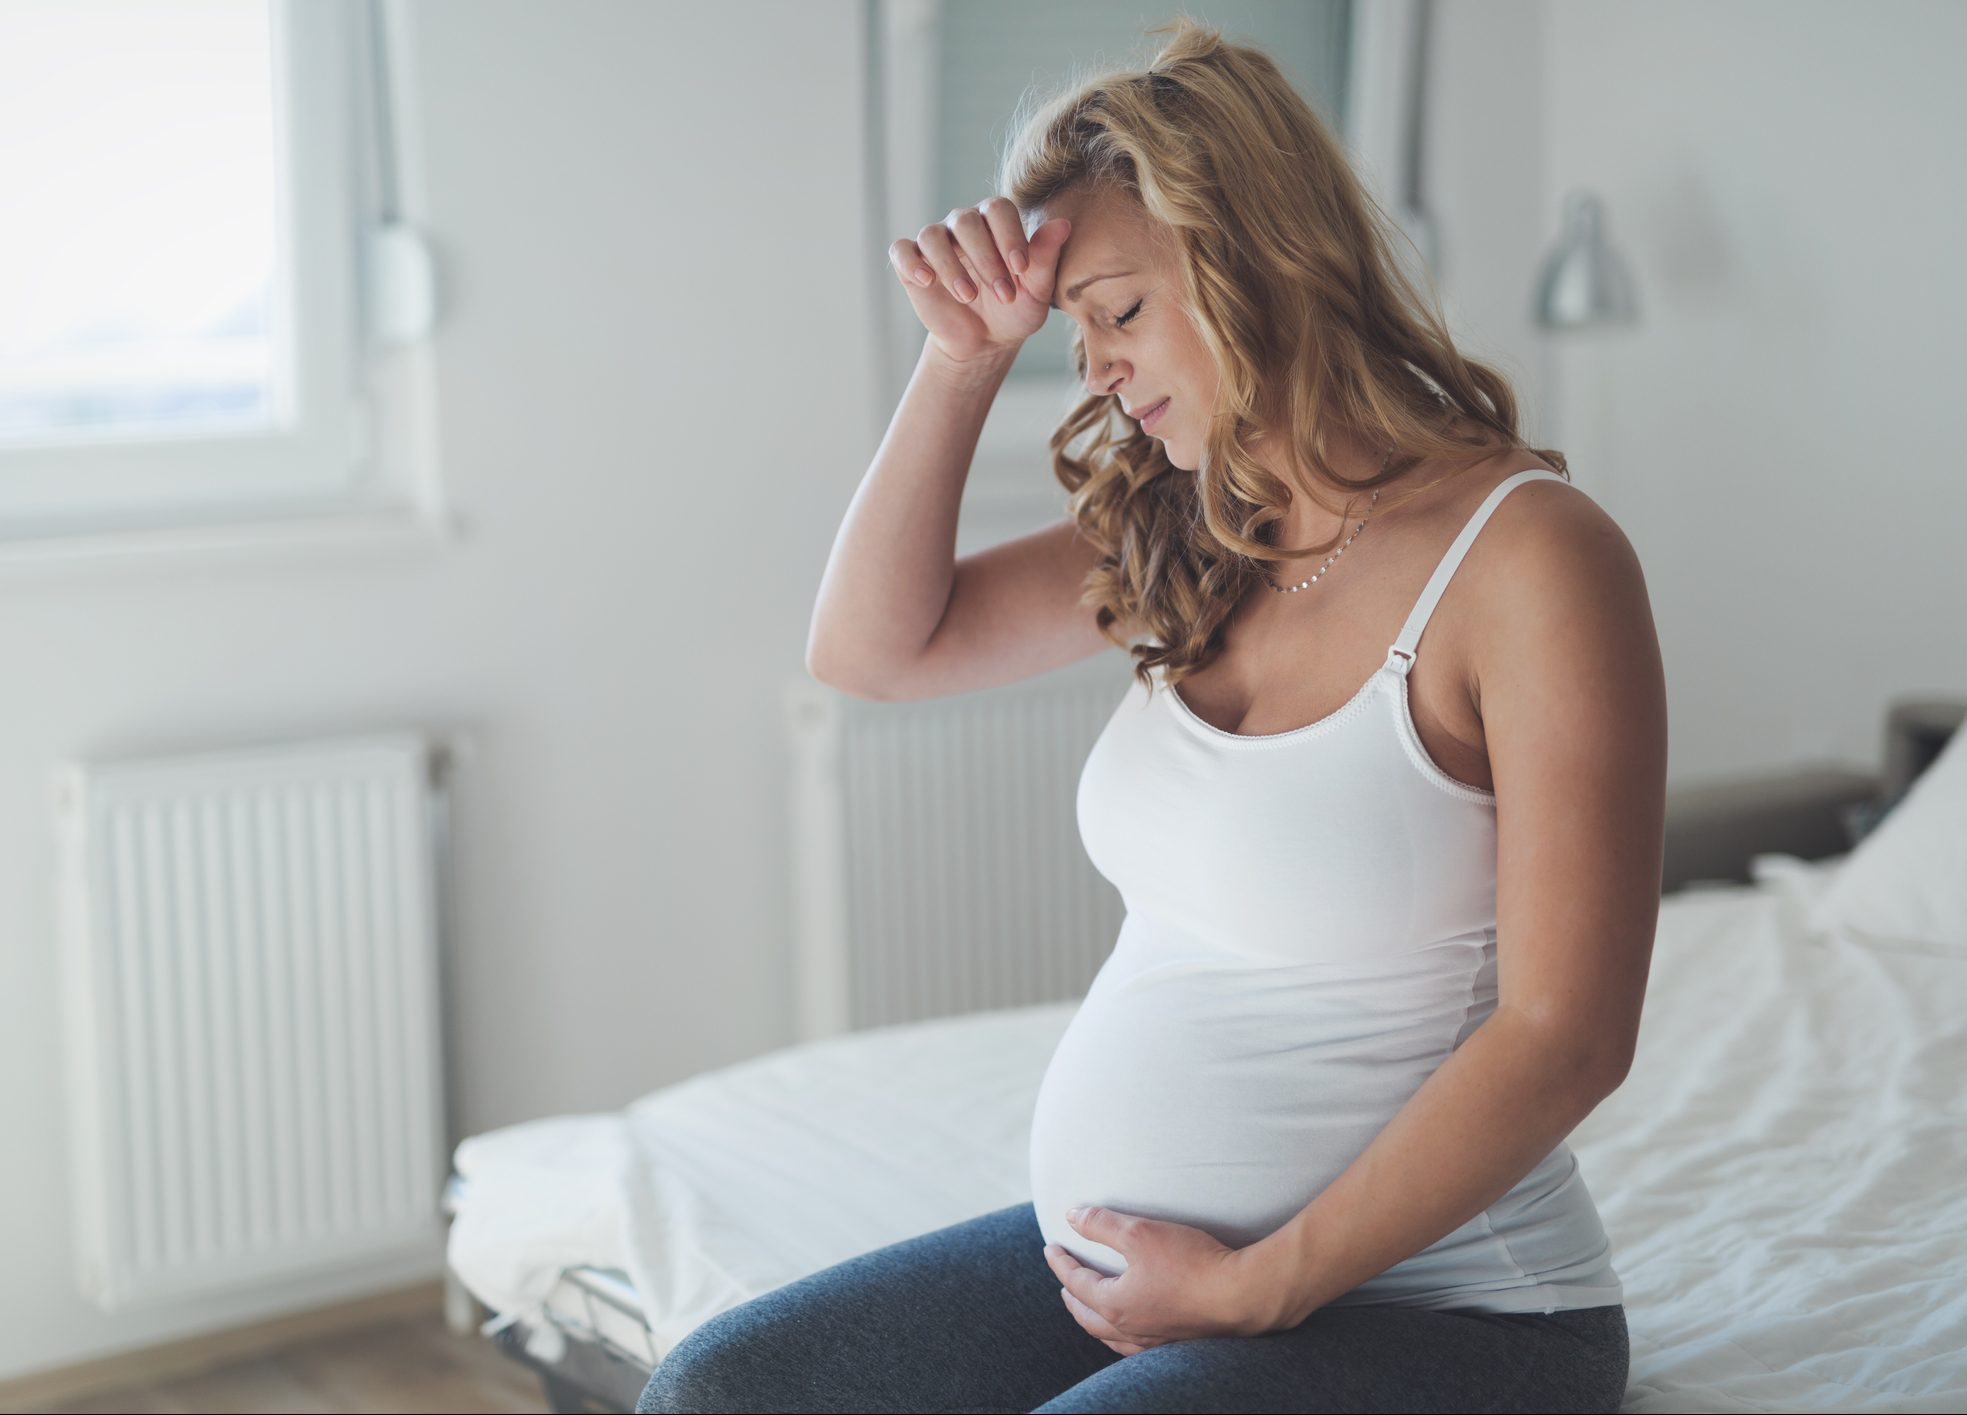 FUNIBER-pregnant-woman-suffering-with-headache-and-nausea